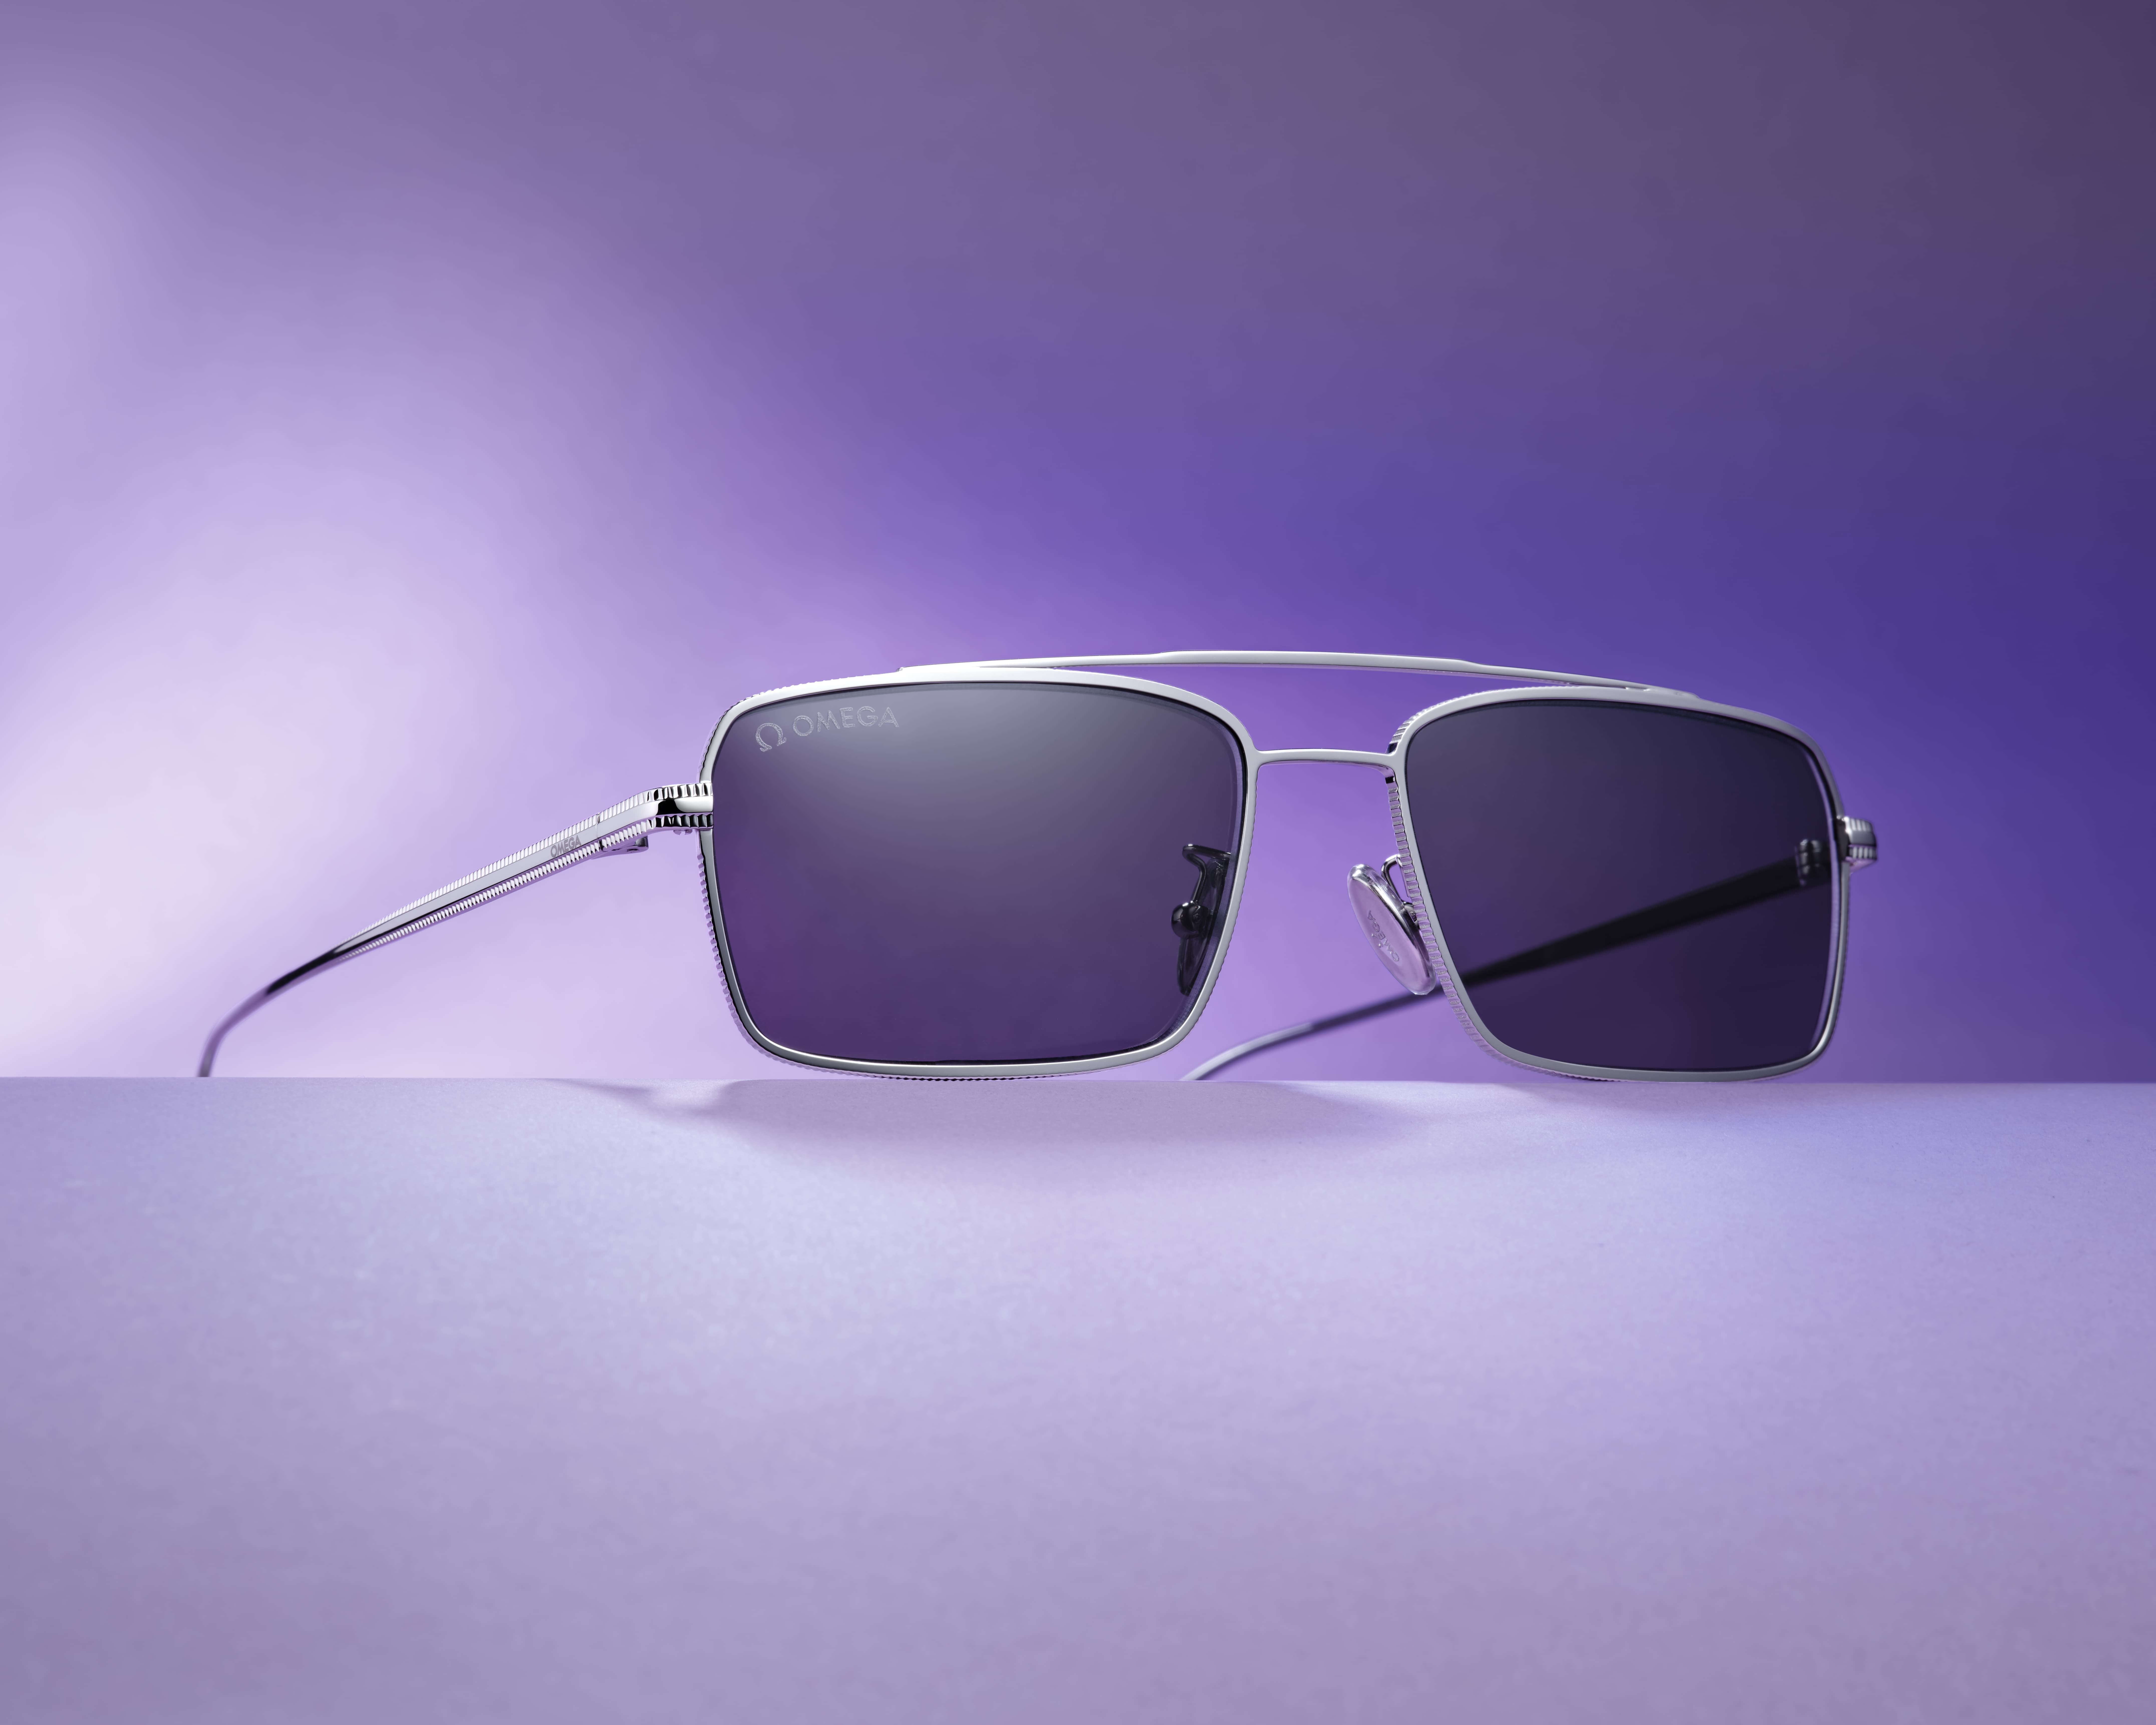 New Summer Styles In the OMEGA Sunglasses 2021 Collection